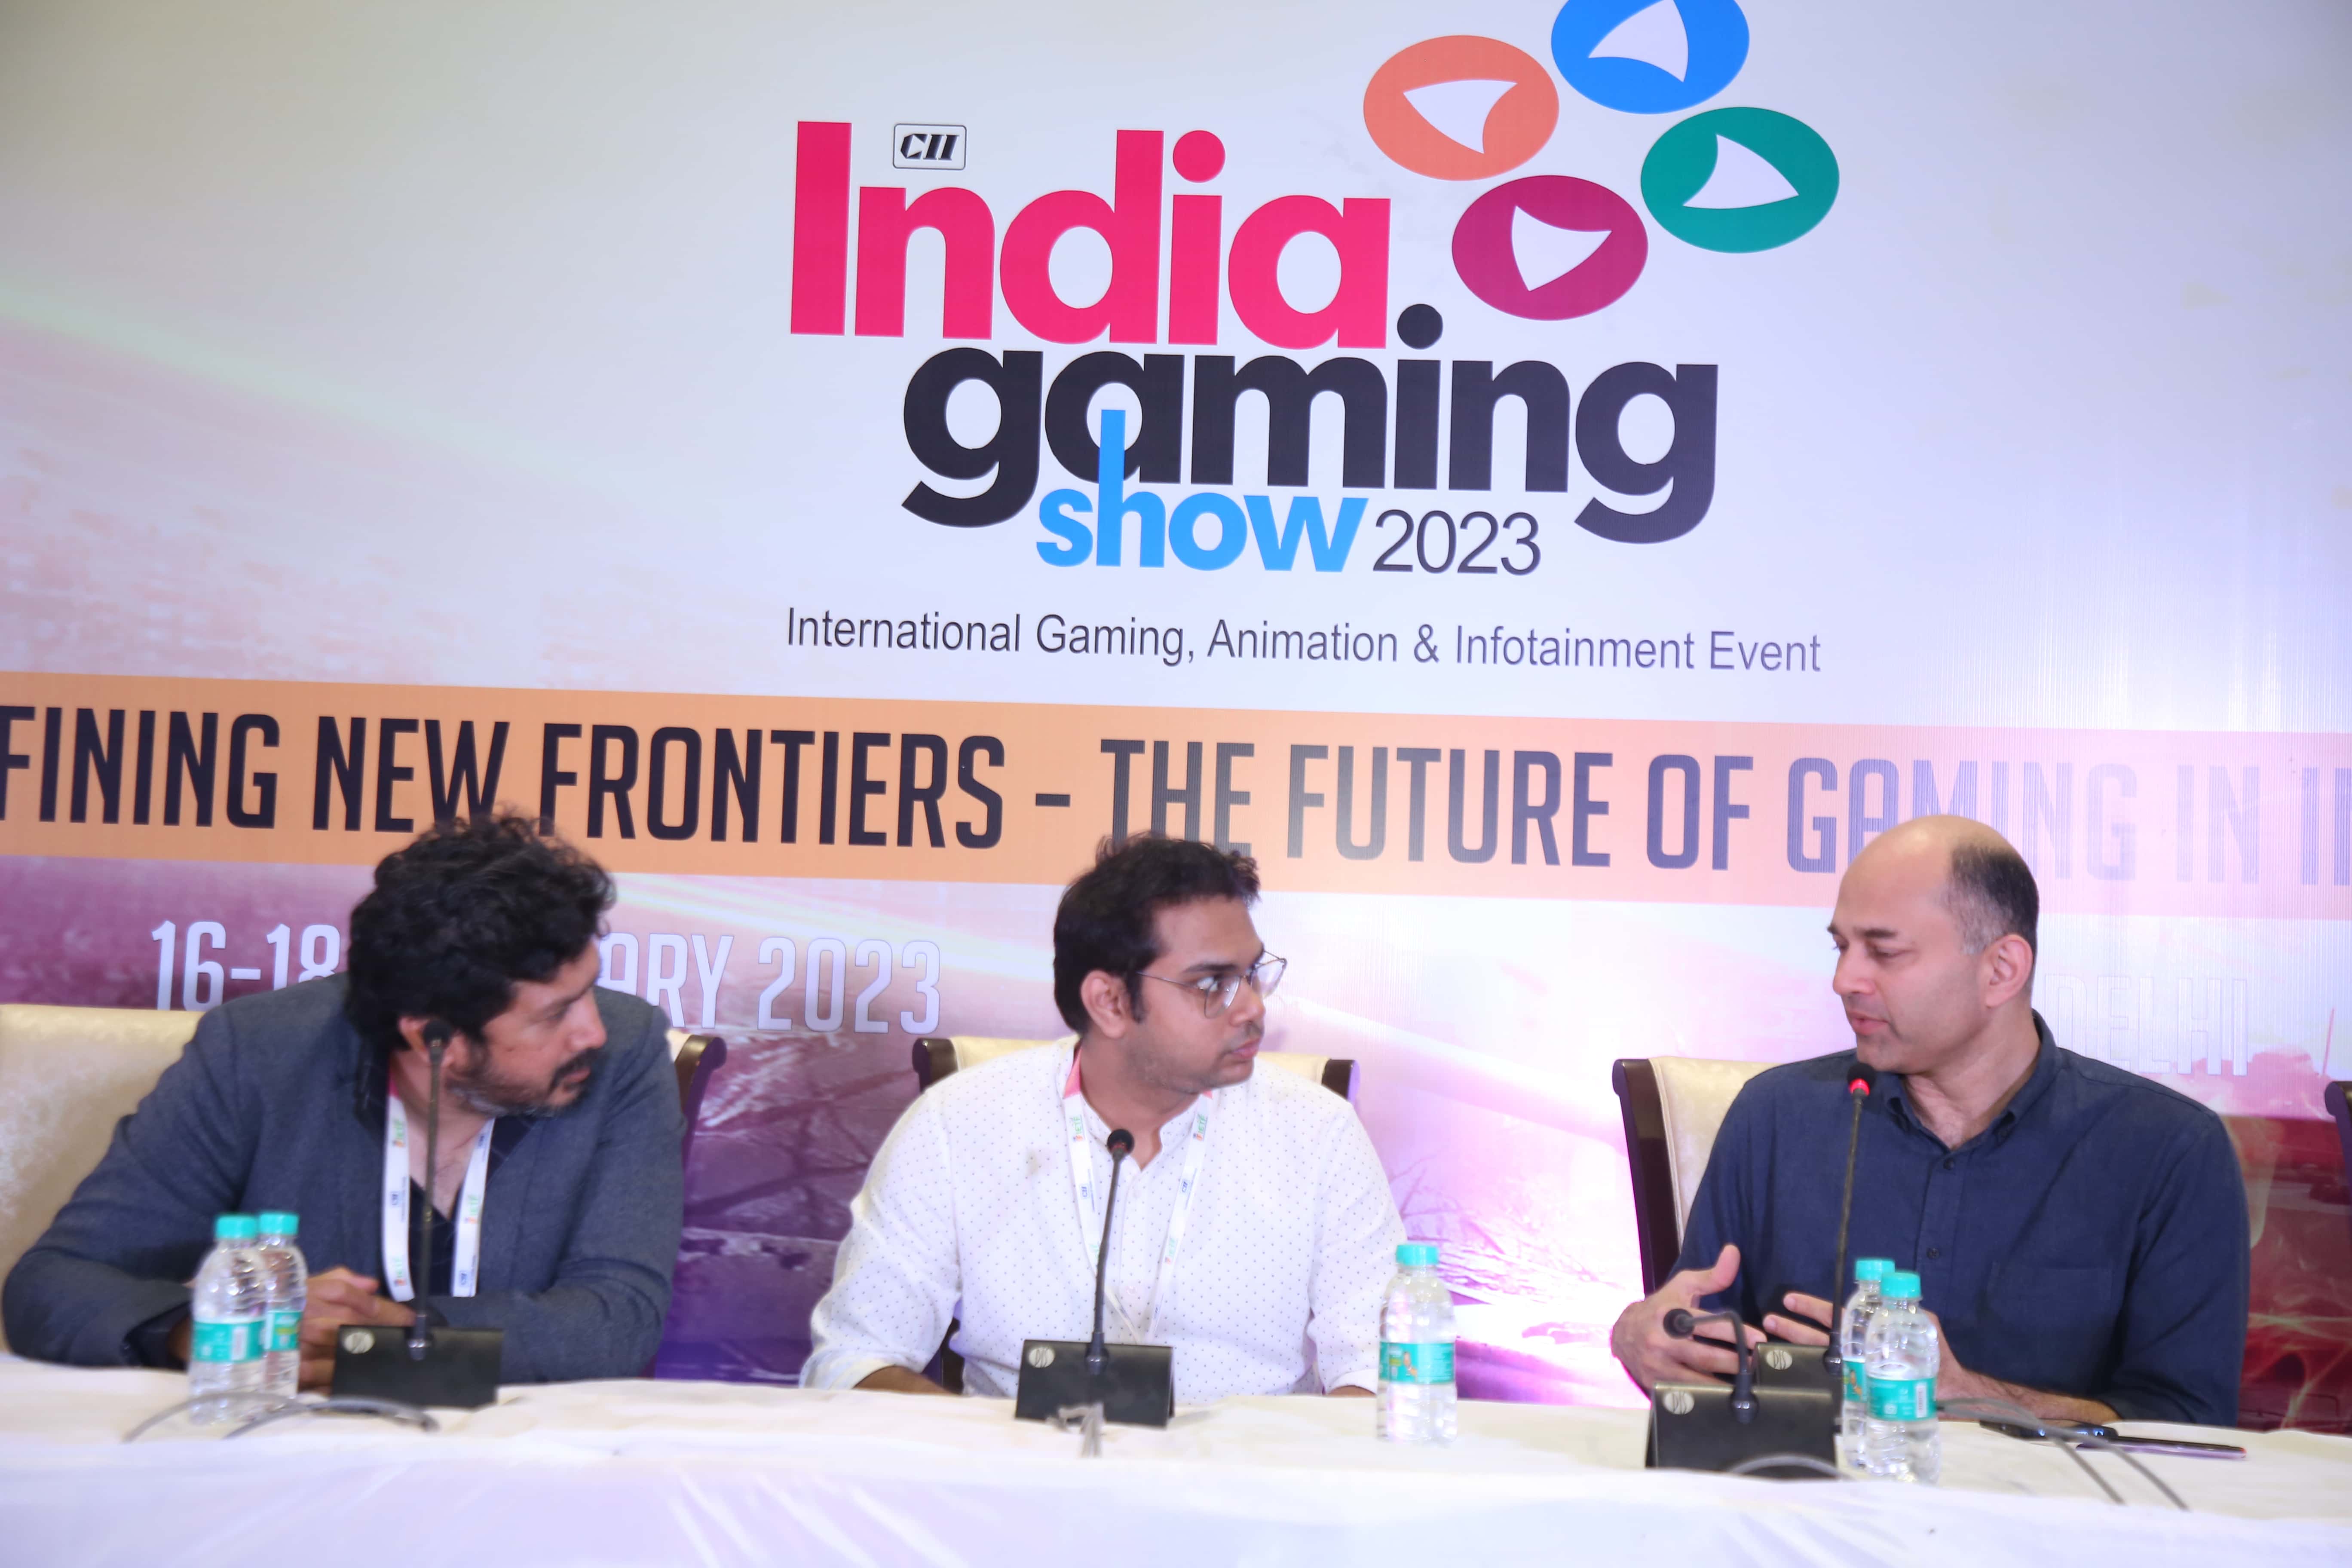 India's Gaming Talent Market